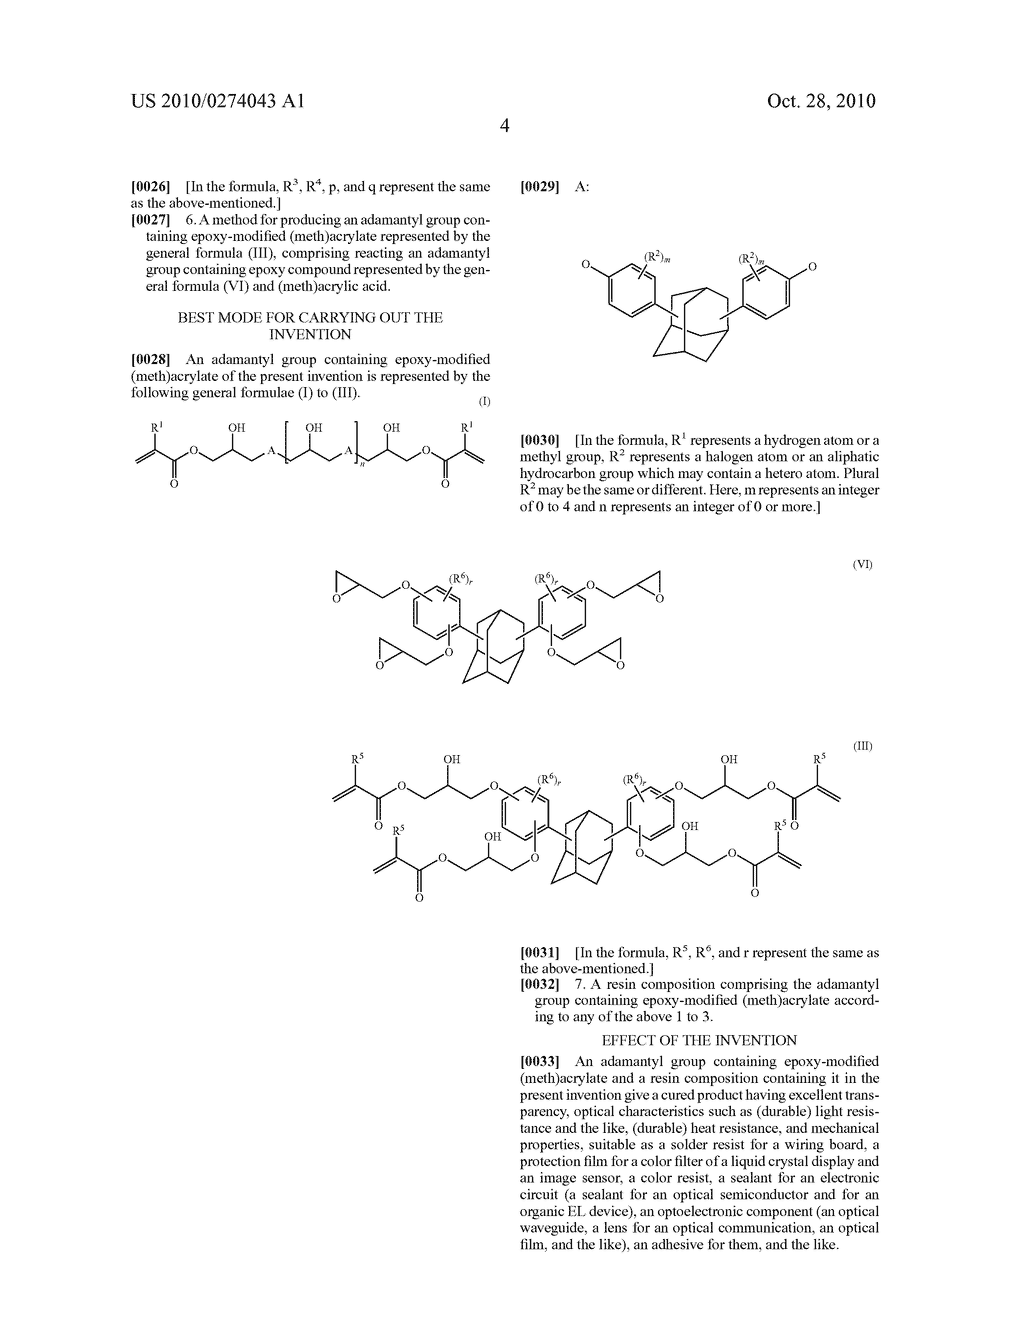 ADAMANTYL GROUP-CONTAINING EPOXY-MODIFIED (METH)ACRYLATE AND RESIN COMPOSITION CONTAINING THE SAME - diagram, schematic, and image 05